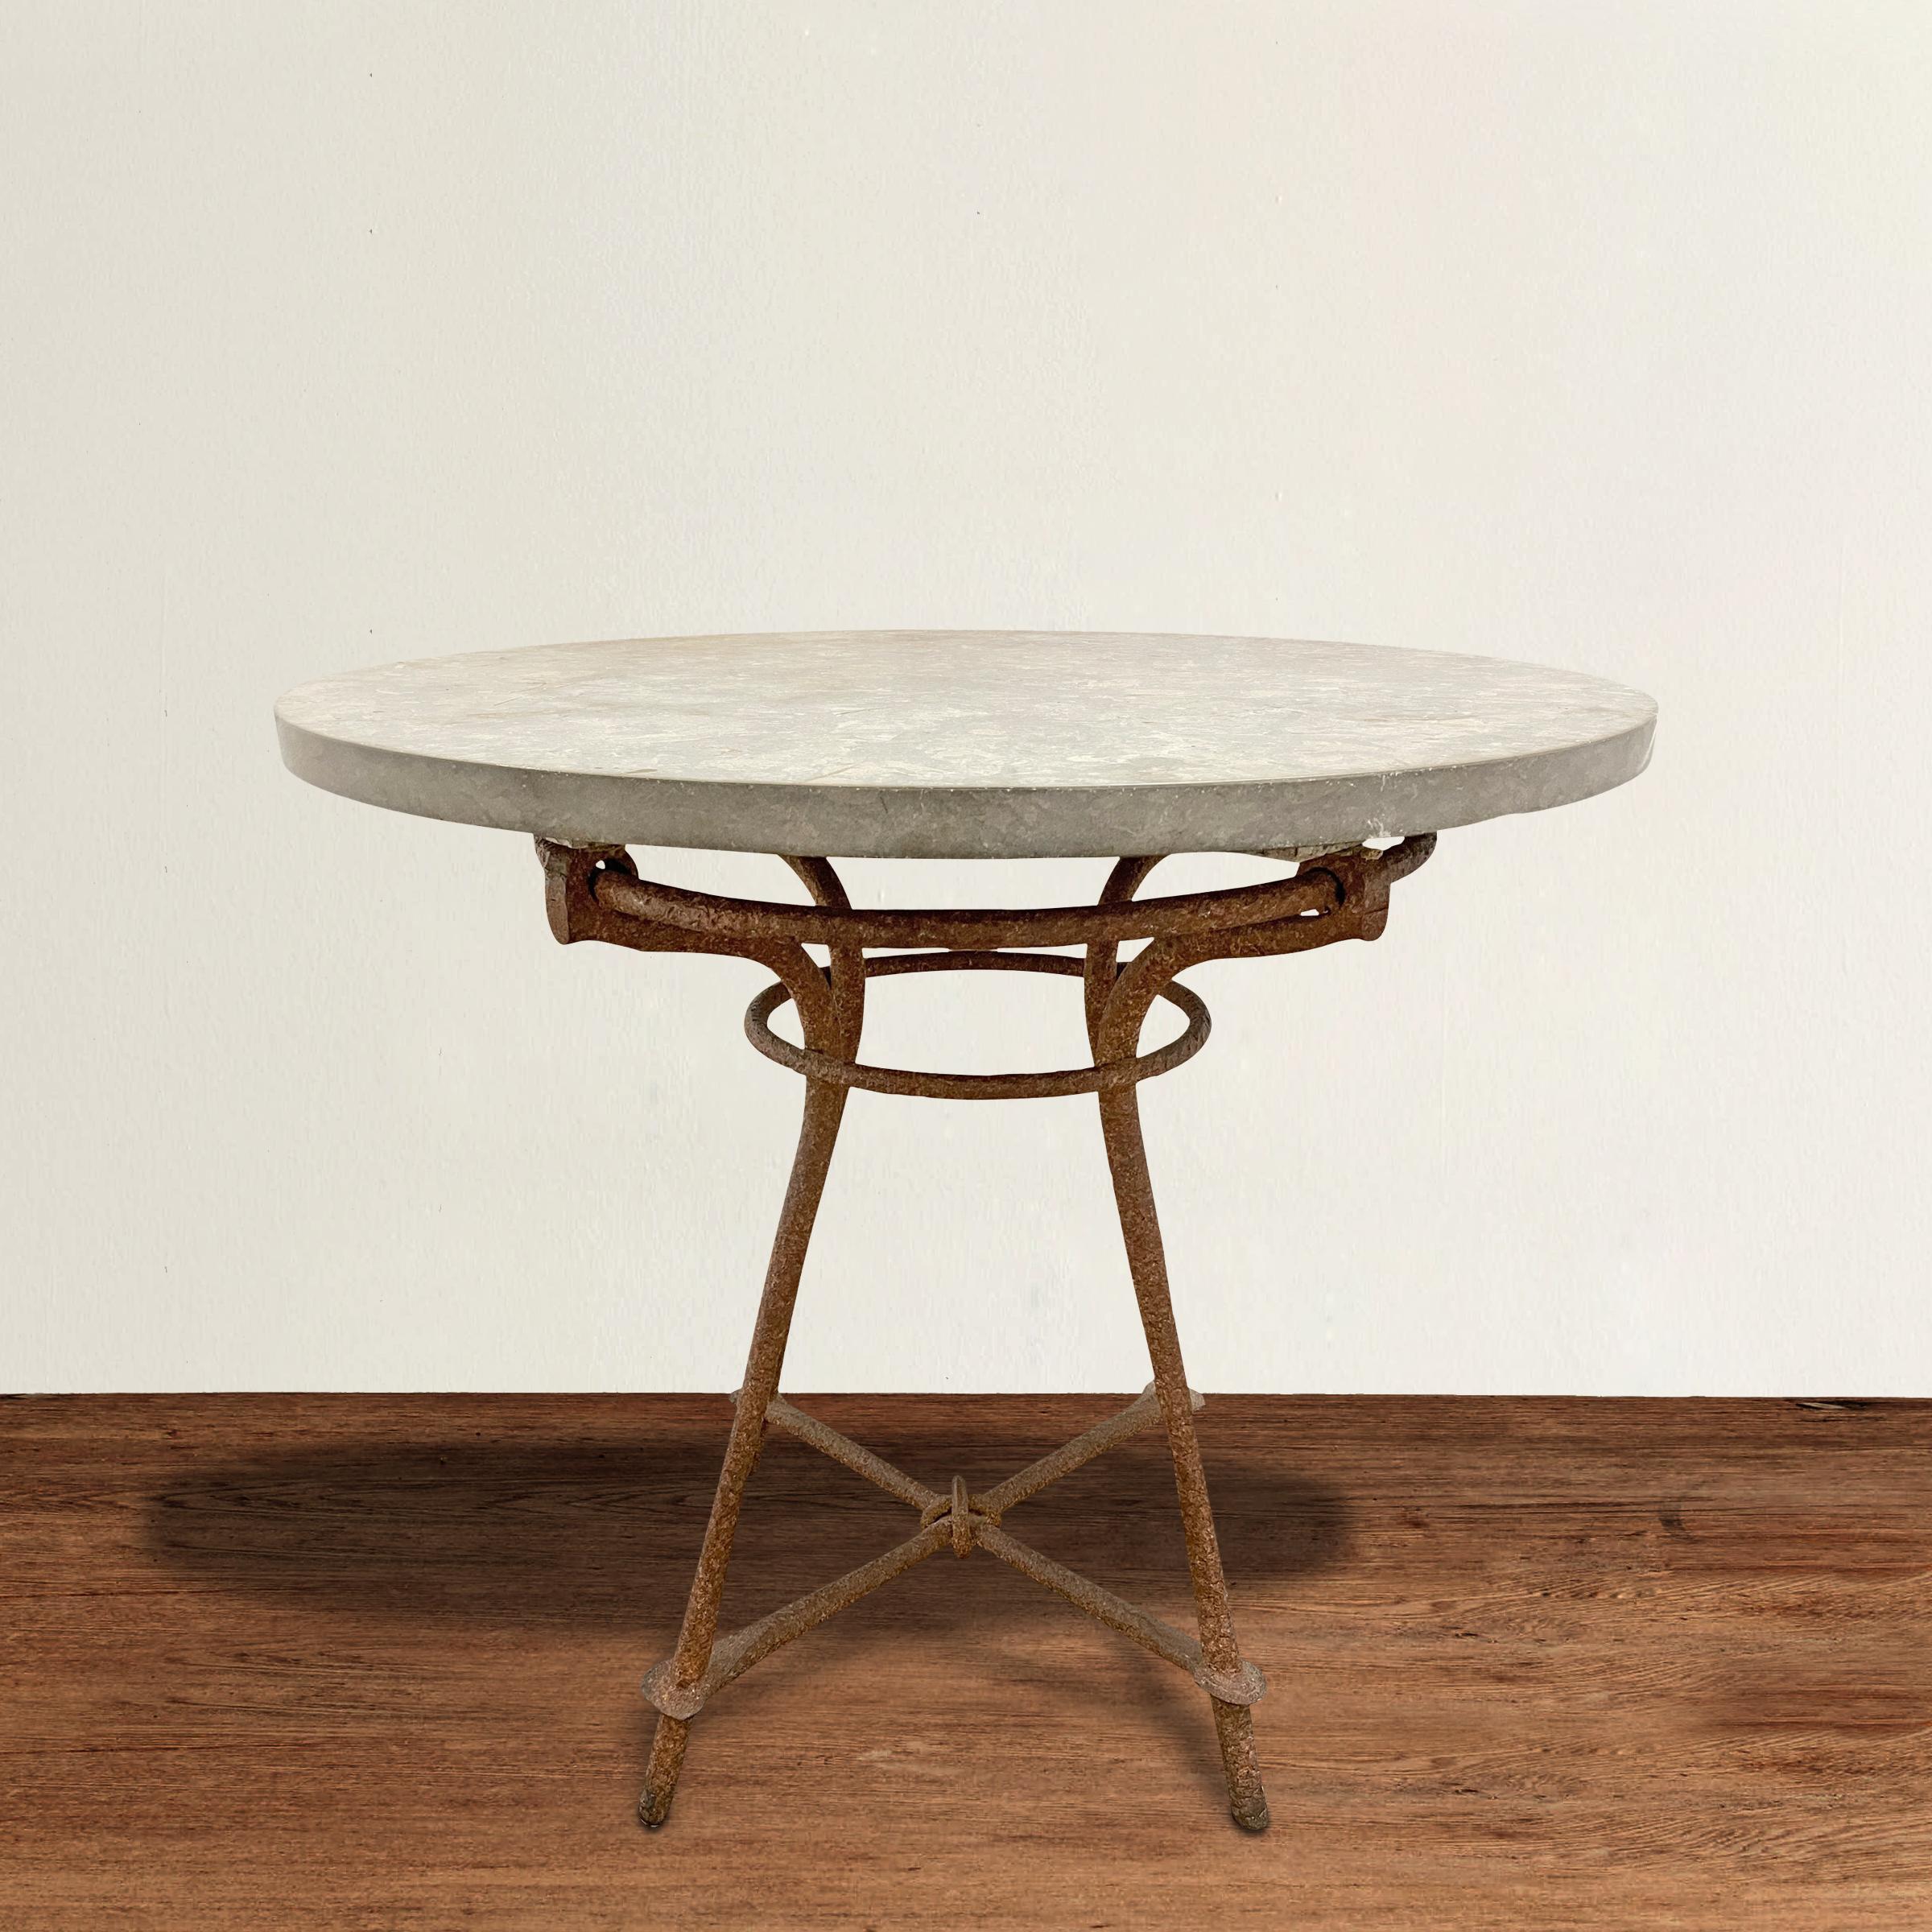 A strong yet charming early 20th century American café table with a Giacometti-inspired hand-wrought iron base with a knot connecting the crossbars, and a thick gray marble top. The table is a wonderful size for a small breakfast table, side table